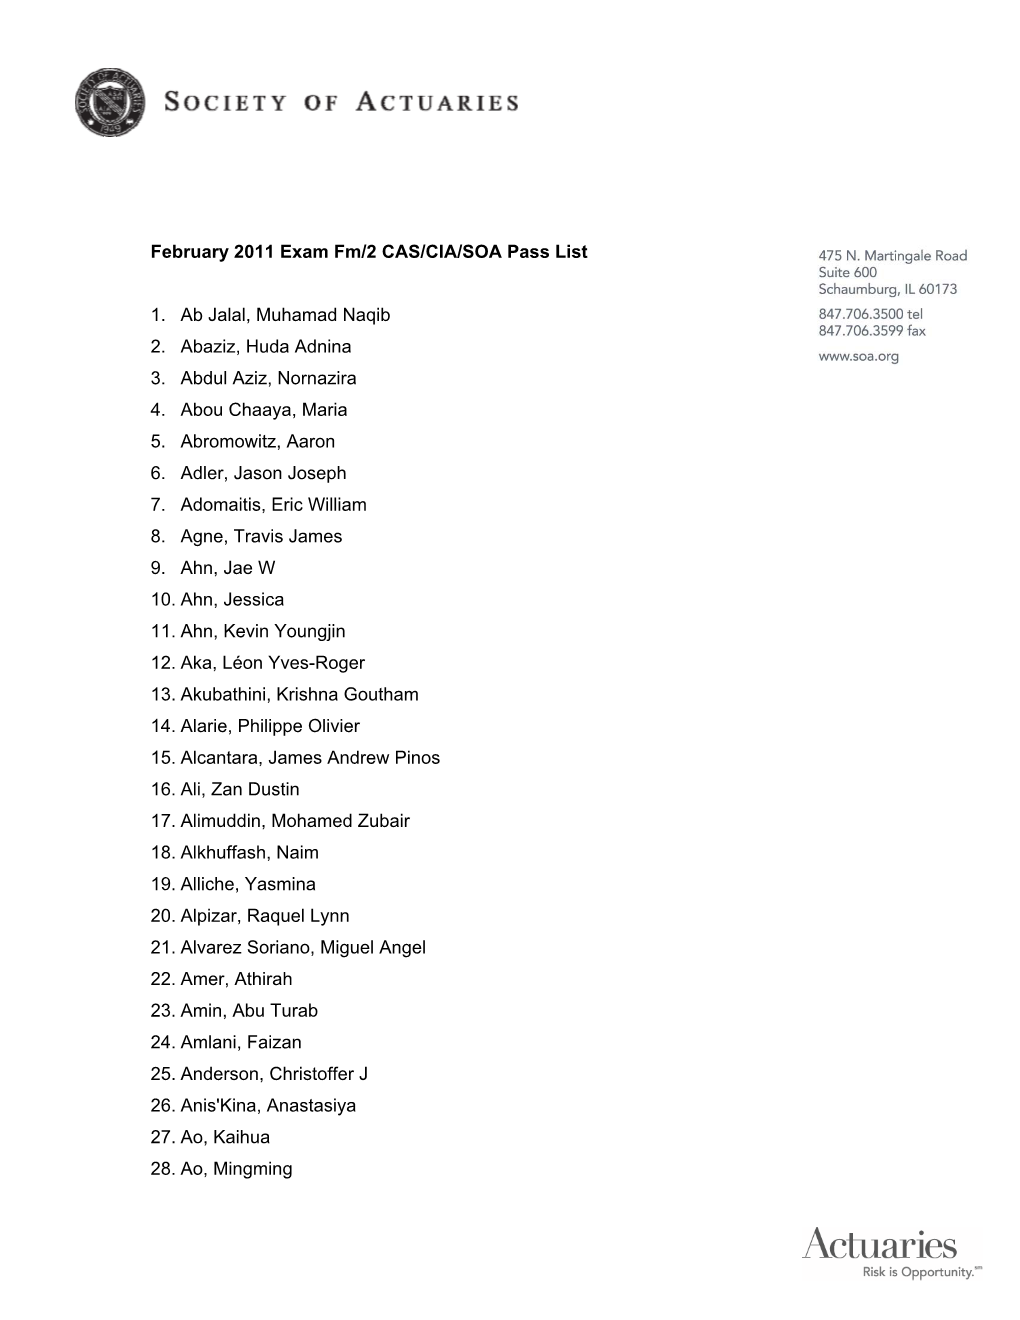 February 2011 List of Passing Candidate Names Exam FM